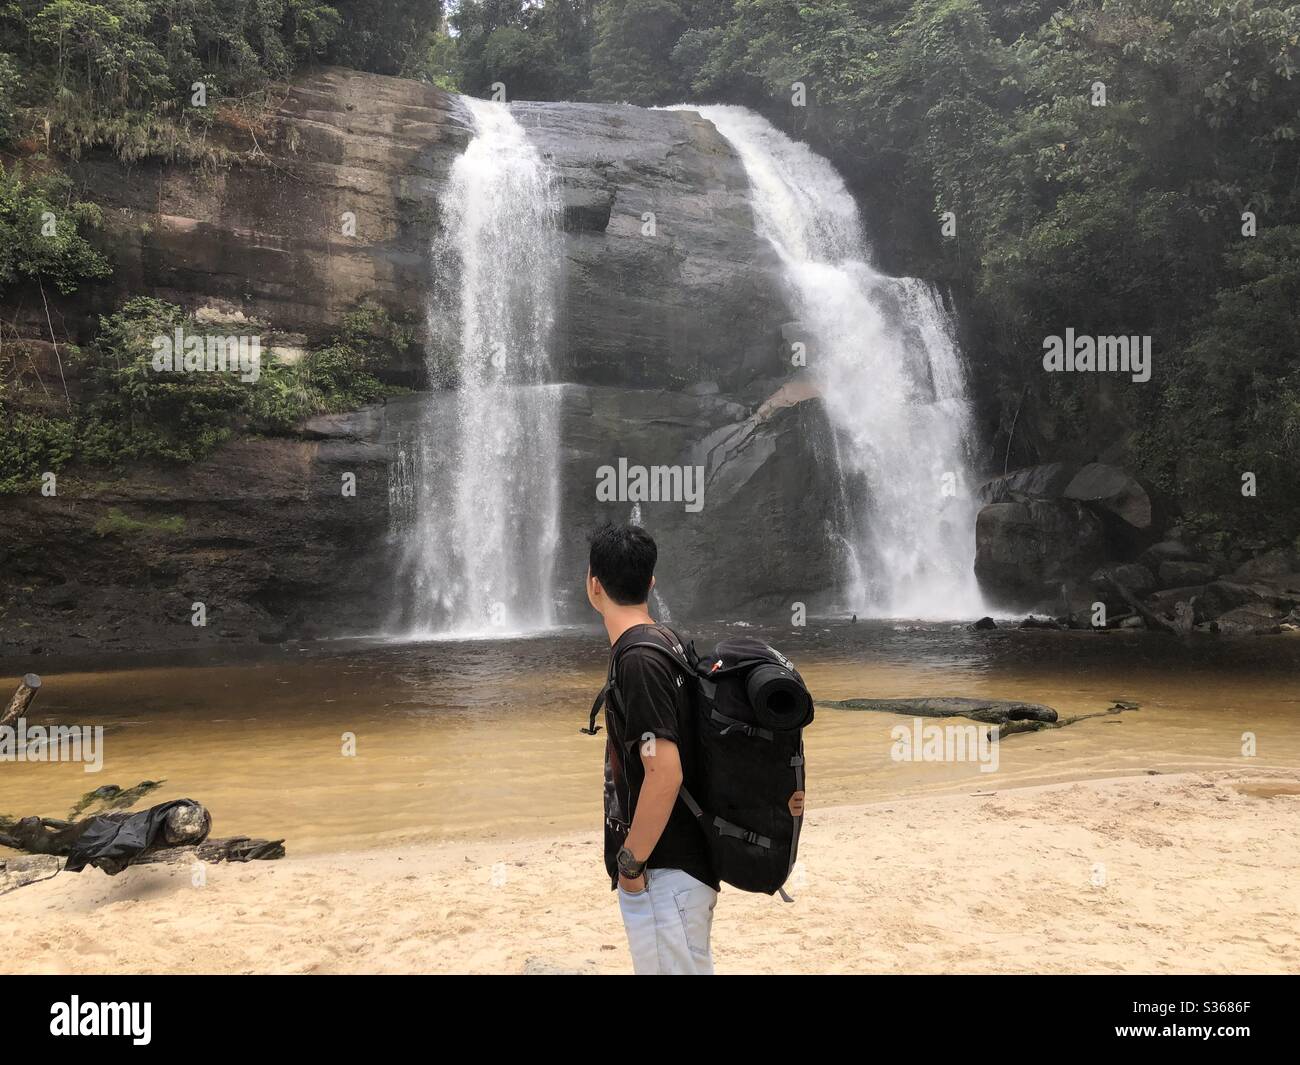 This is the Dait waterfall in West Kalimantan. Stock Photo